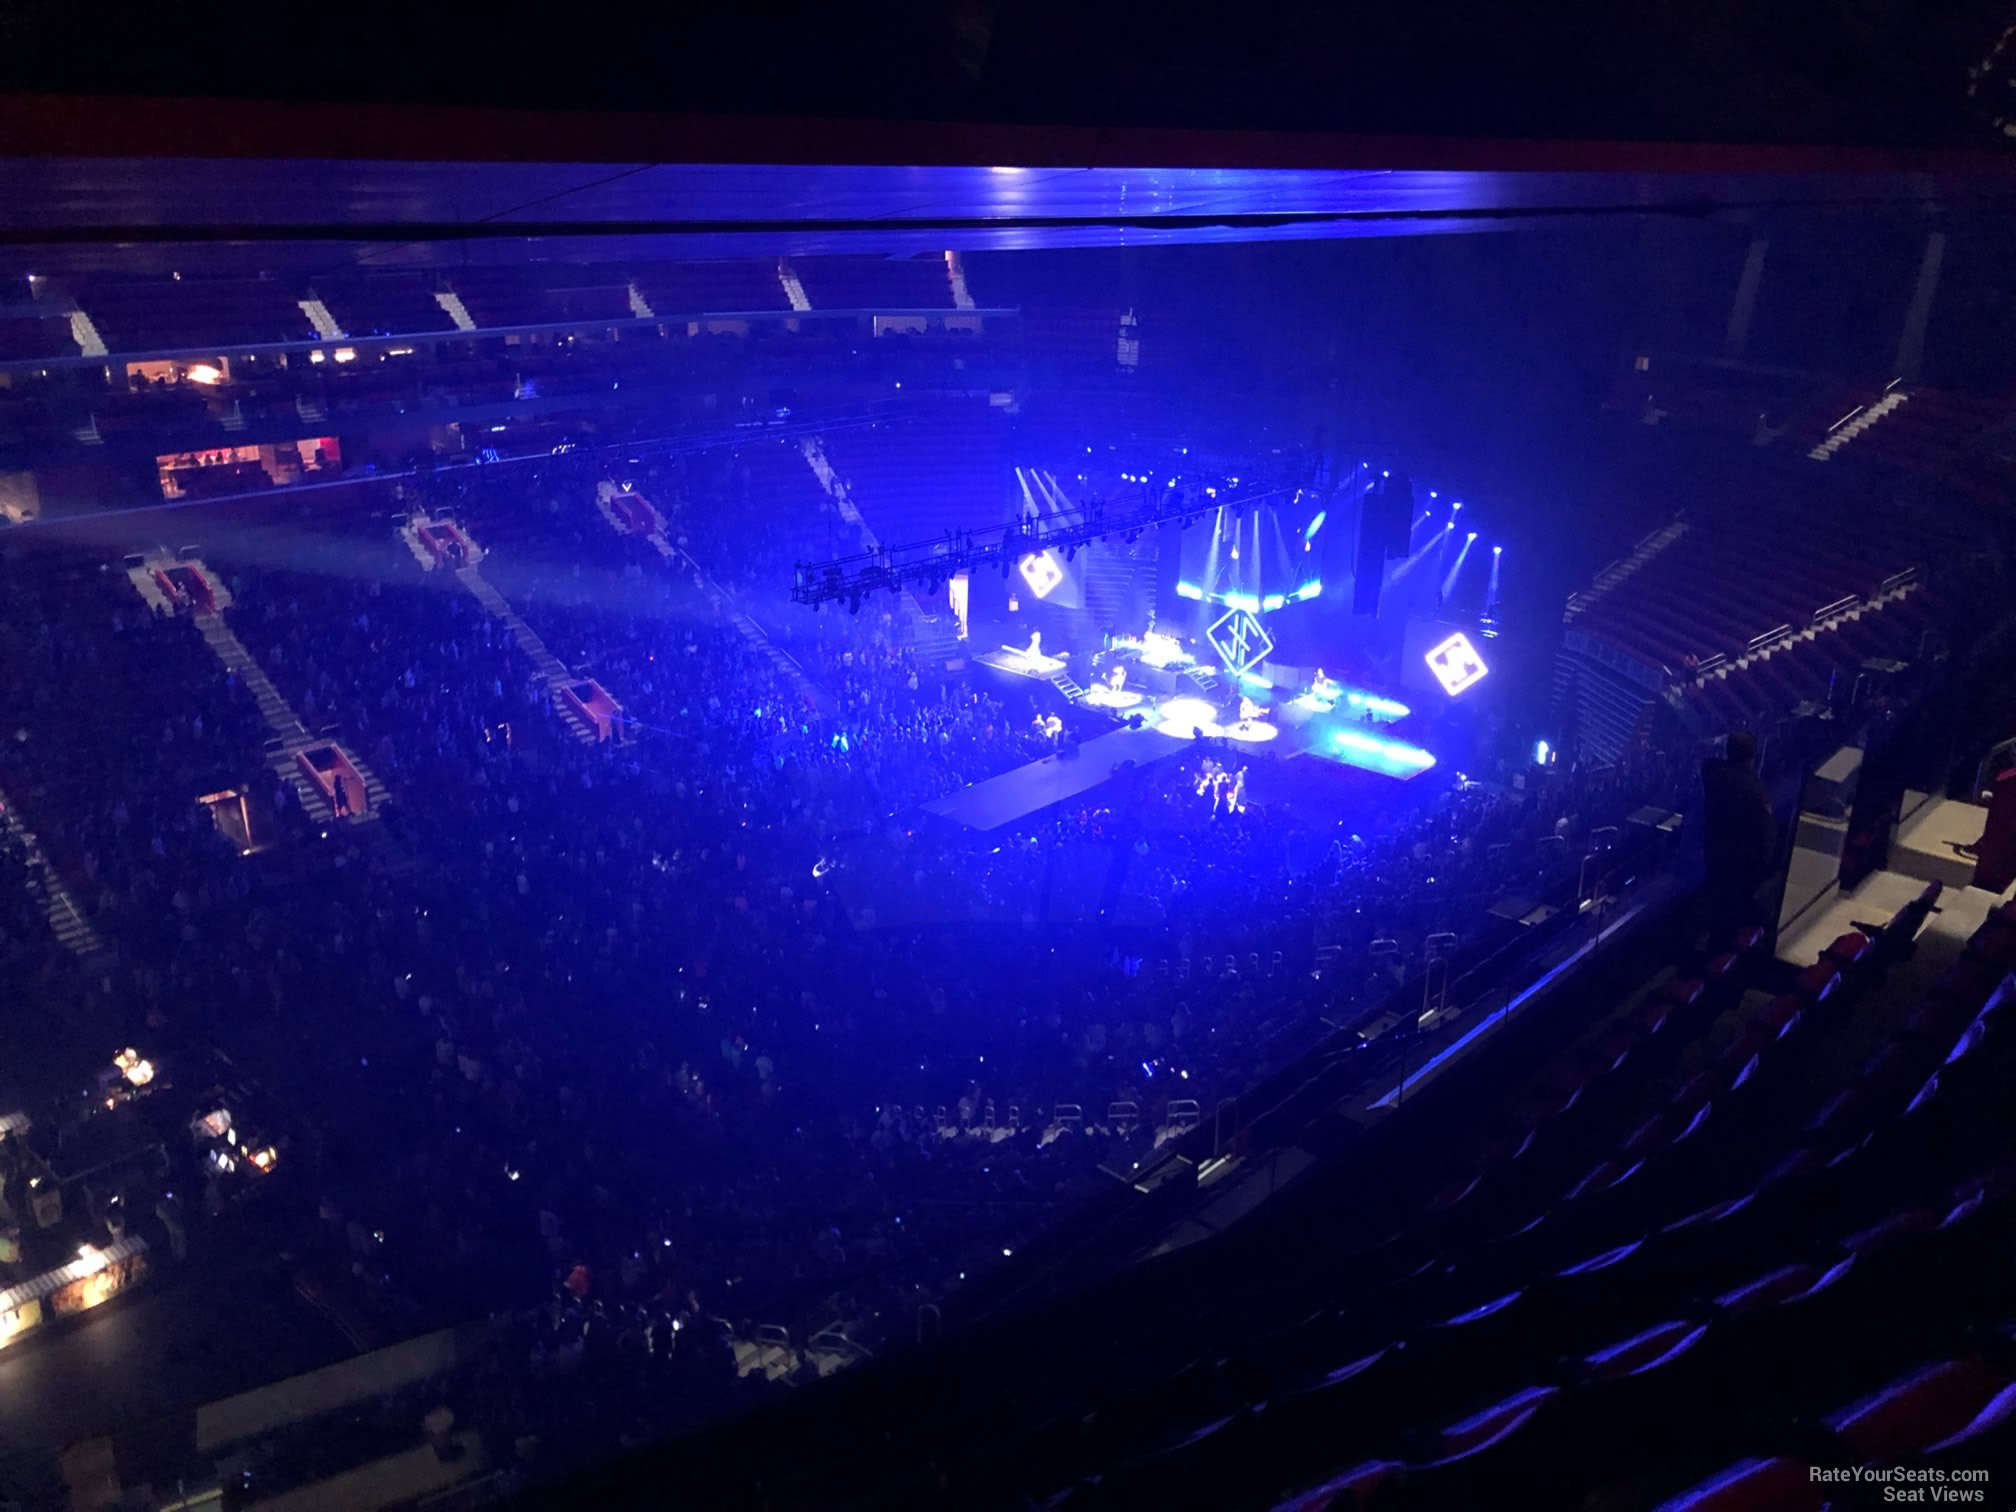 section 215, row 7 seat view  for concert - little caesars arena